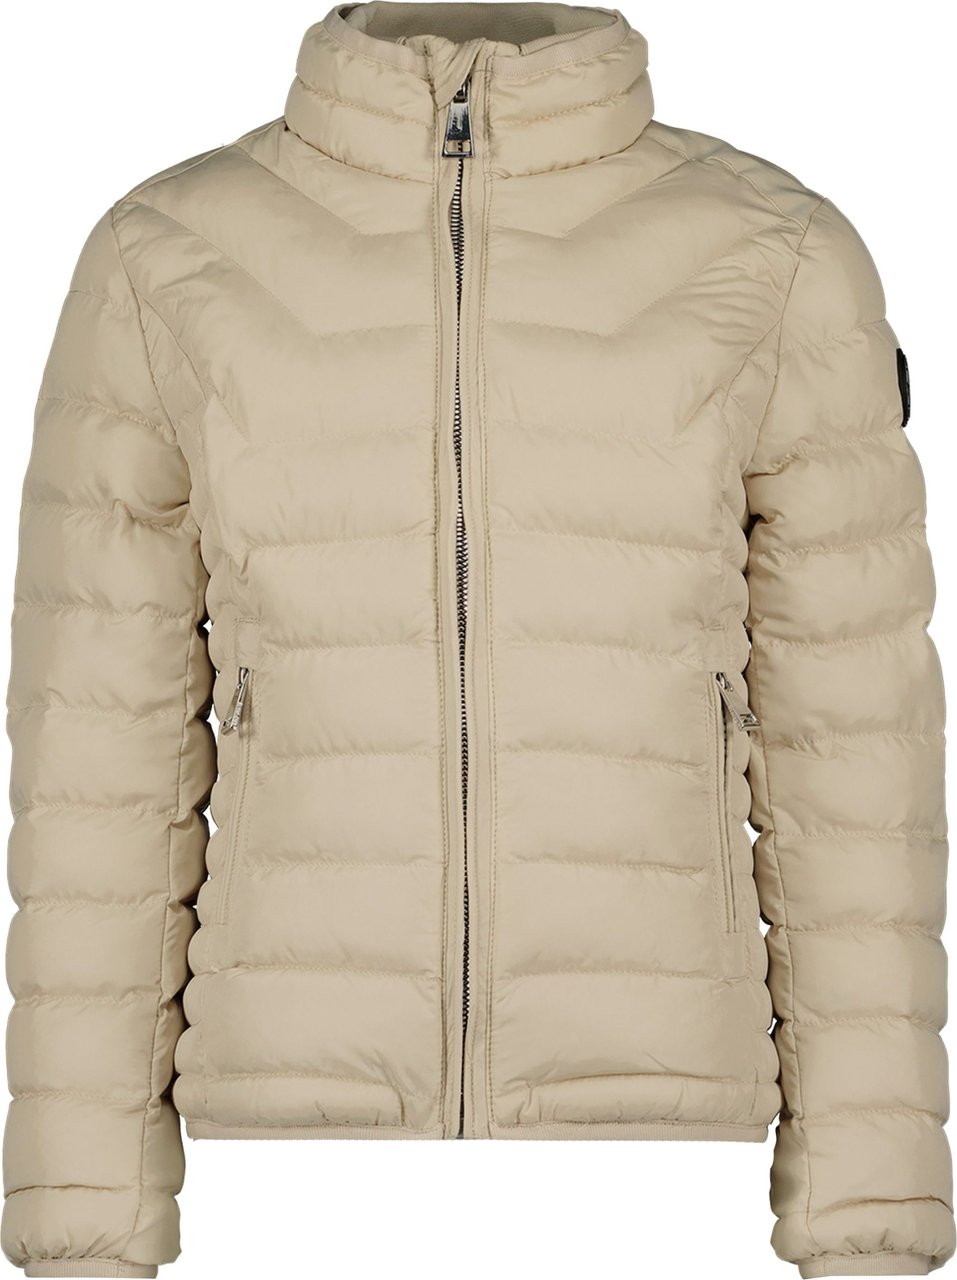 Airforce Padded Jacket Grijs